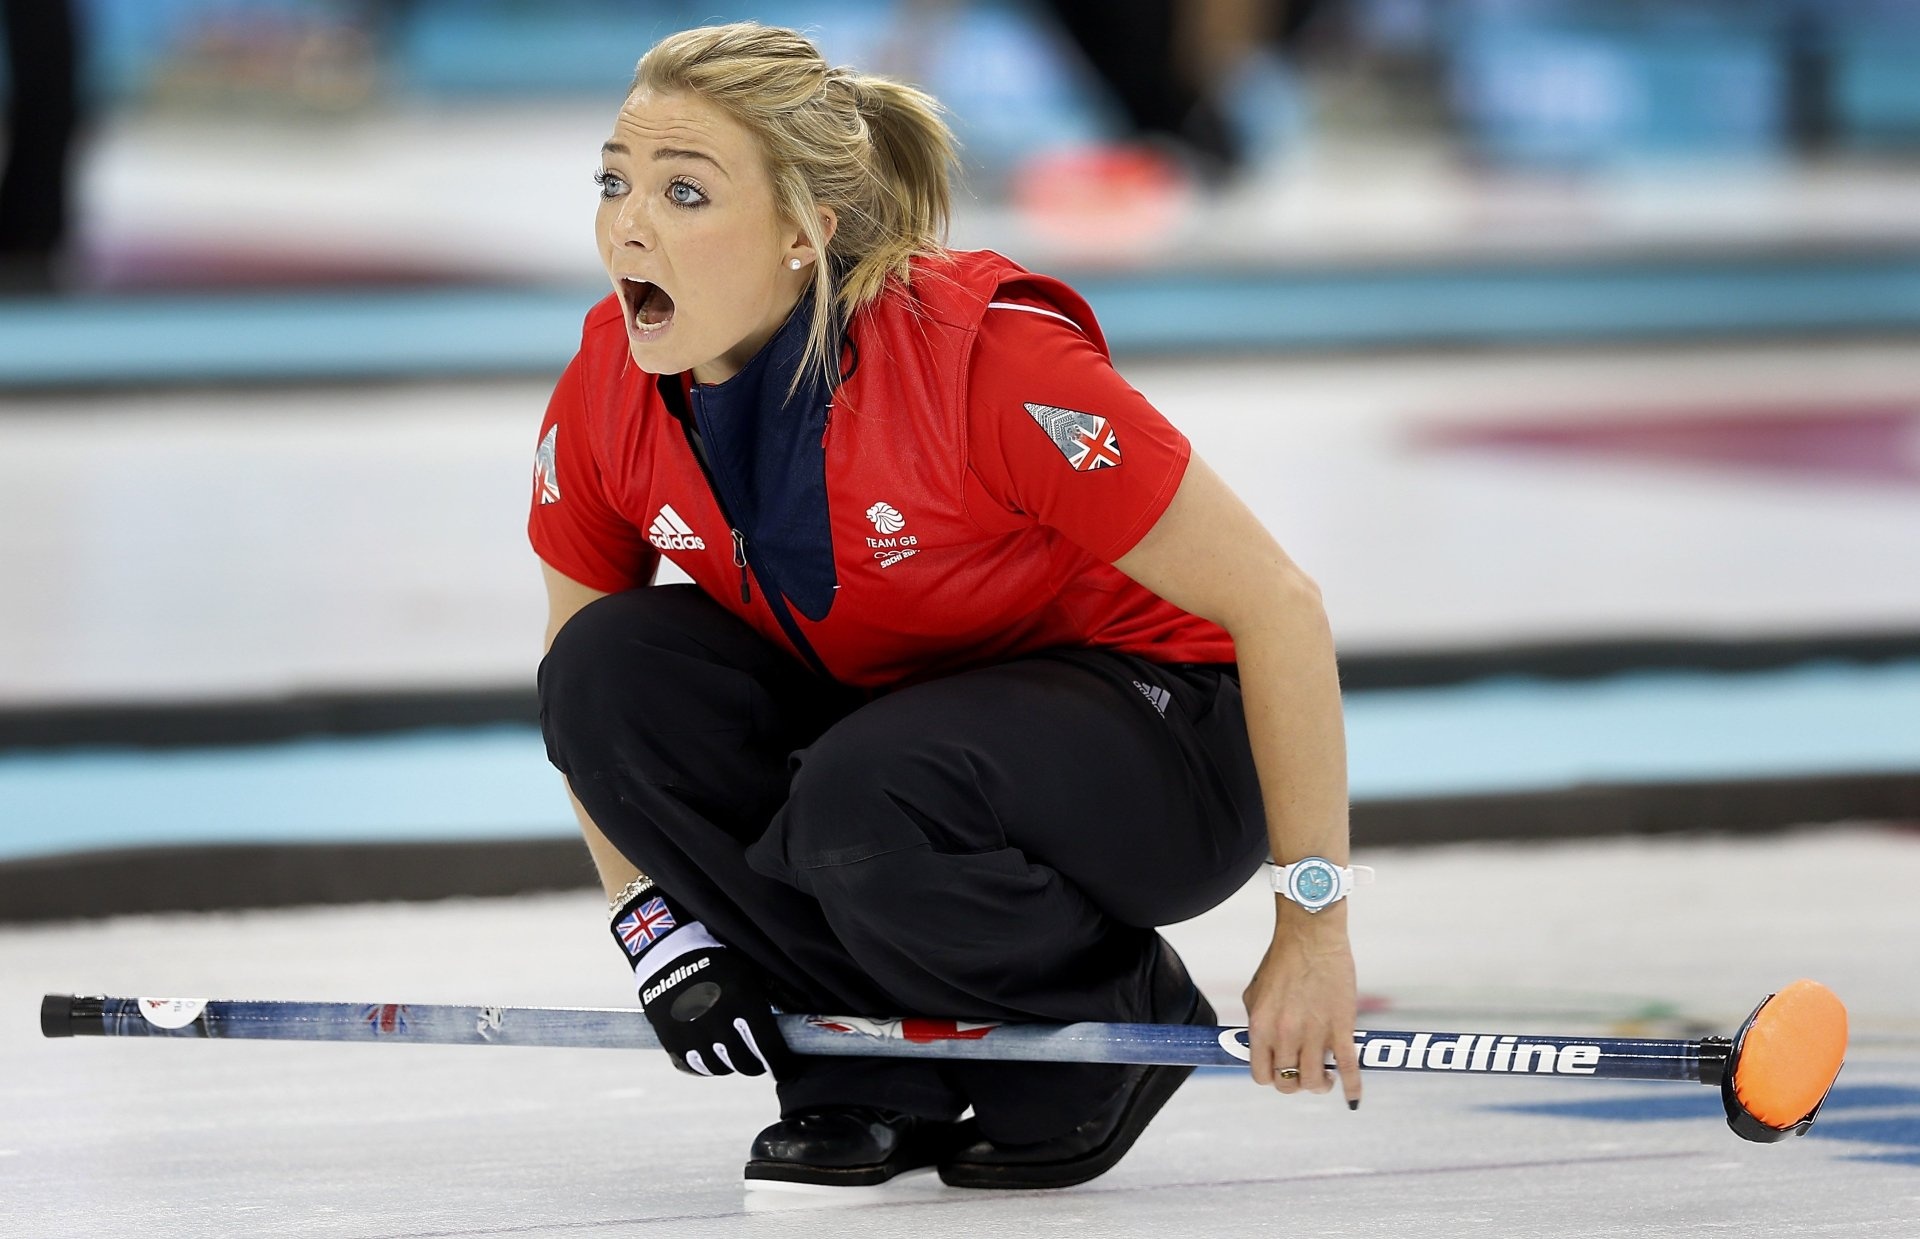 Curling: Anna Sloan of Great Britain competes during the Curling Women's Round Robin. 1920x1240 HD Background.